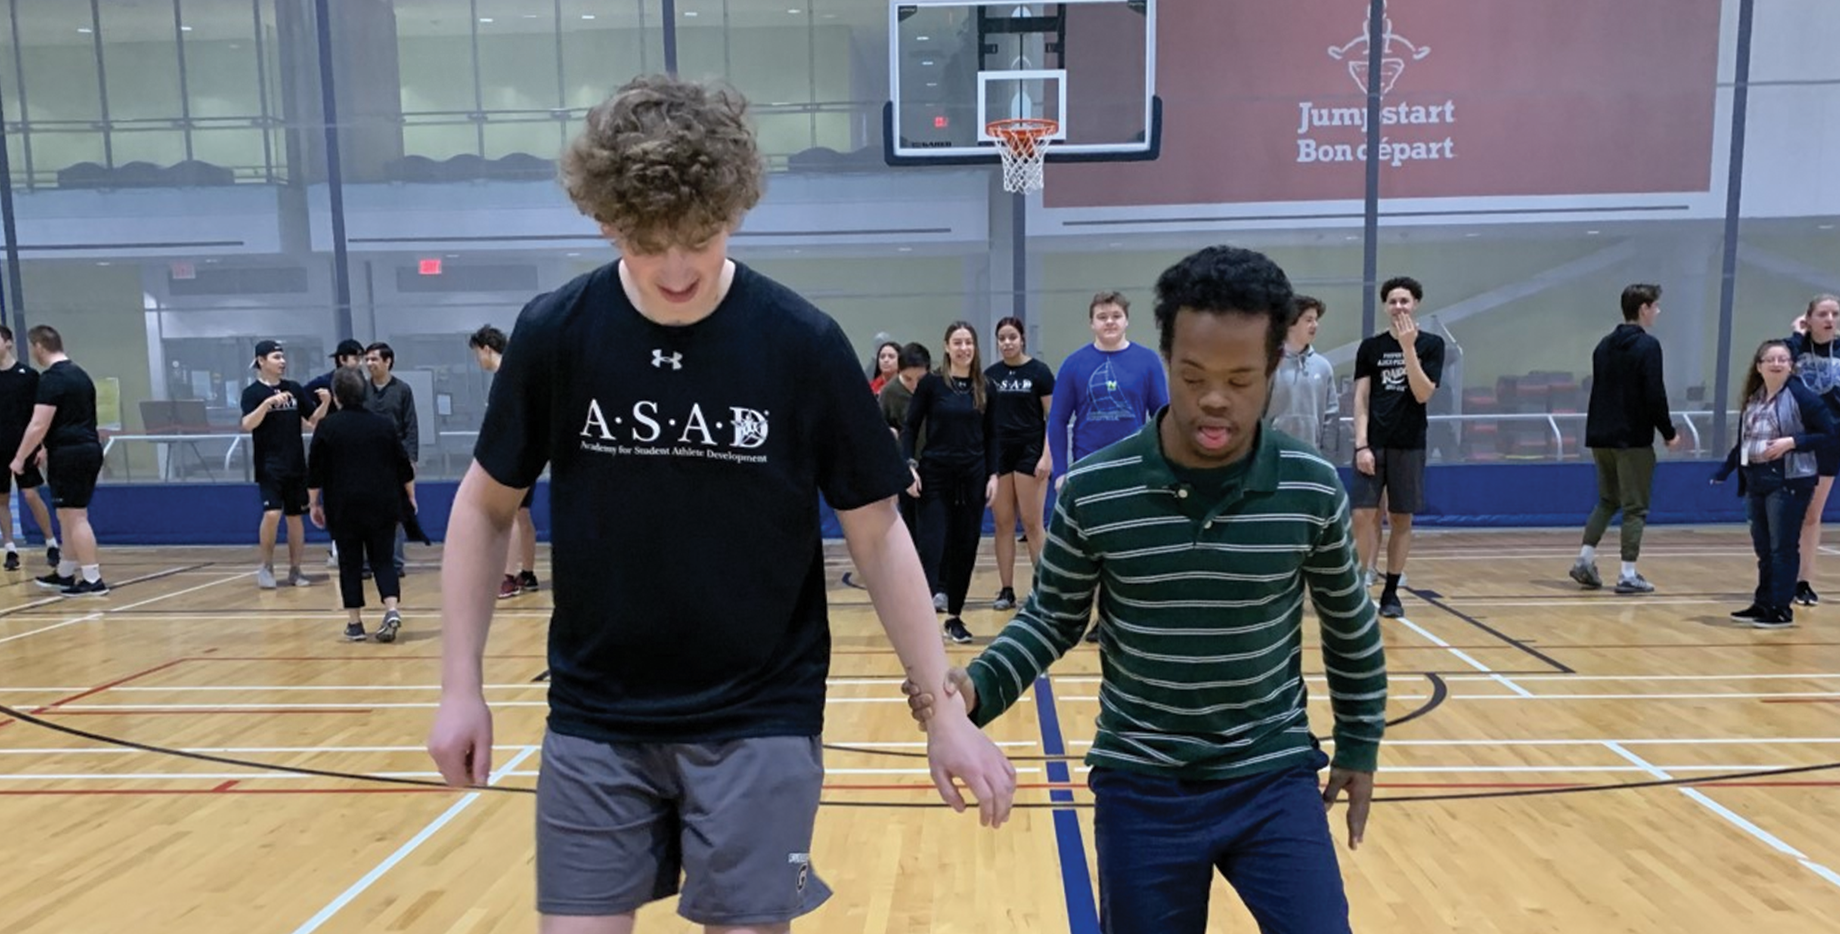 ASAD student athlete assisting a Thrive student share Abilities Centre court with fitness activity